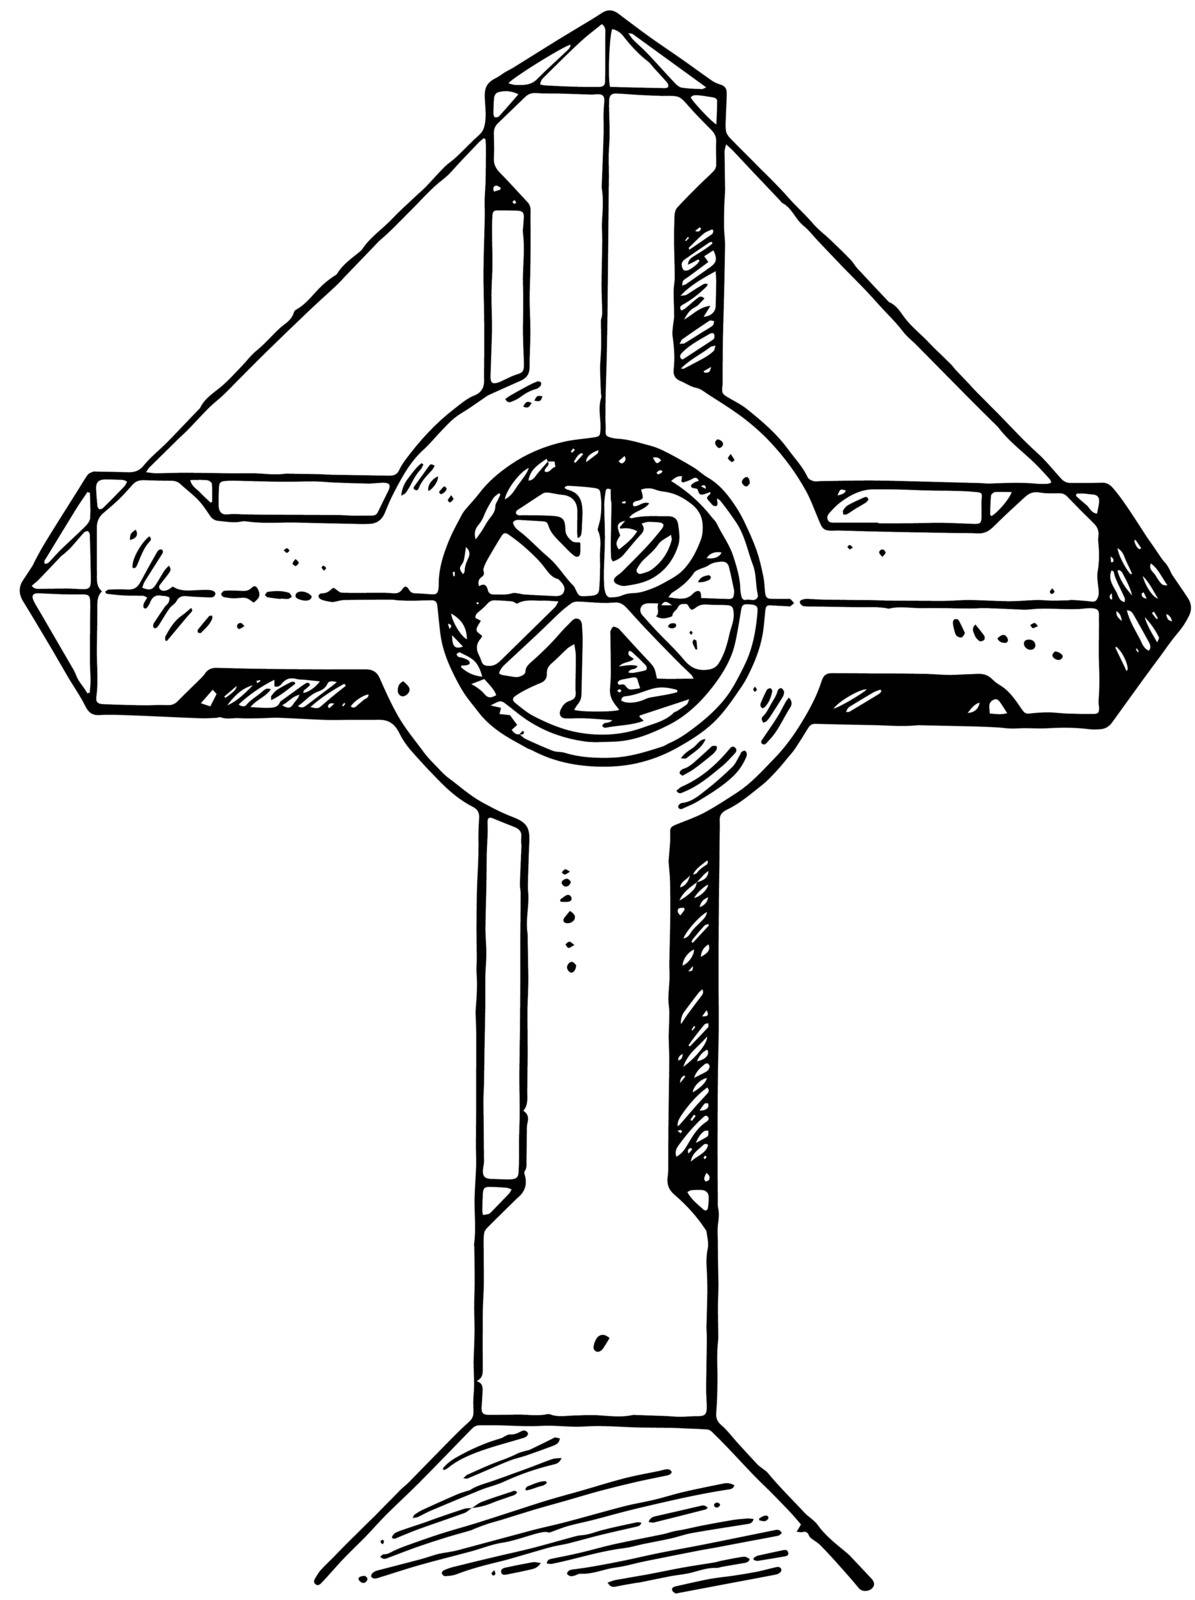 This is a photo of cross sign on which there are a few photos of the Lord Jesus. These photos are of that time when he was alive three days after his demise, vintage line drawing or engraving illustration.